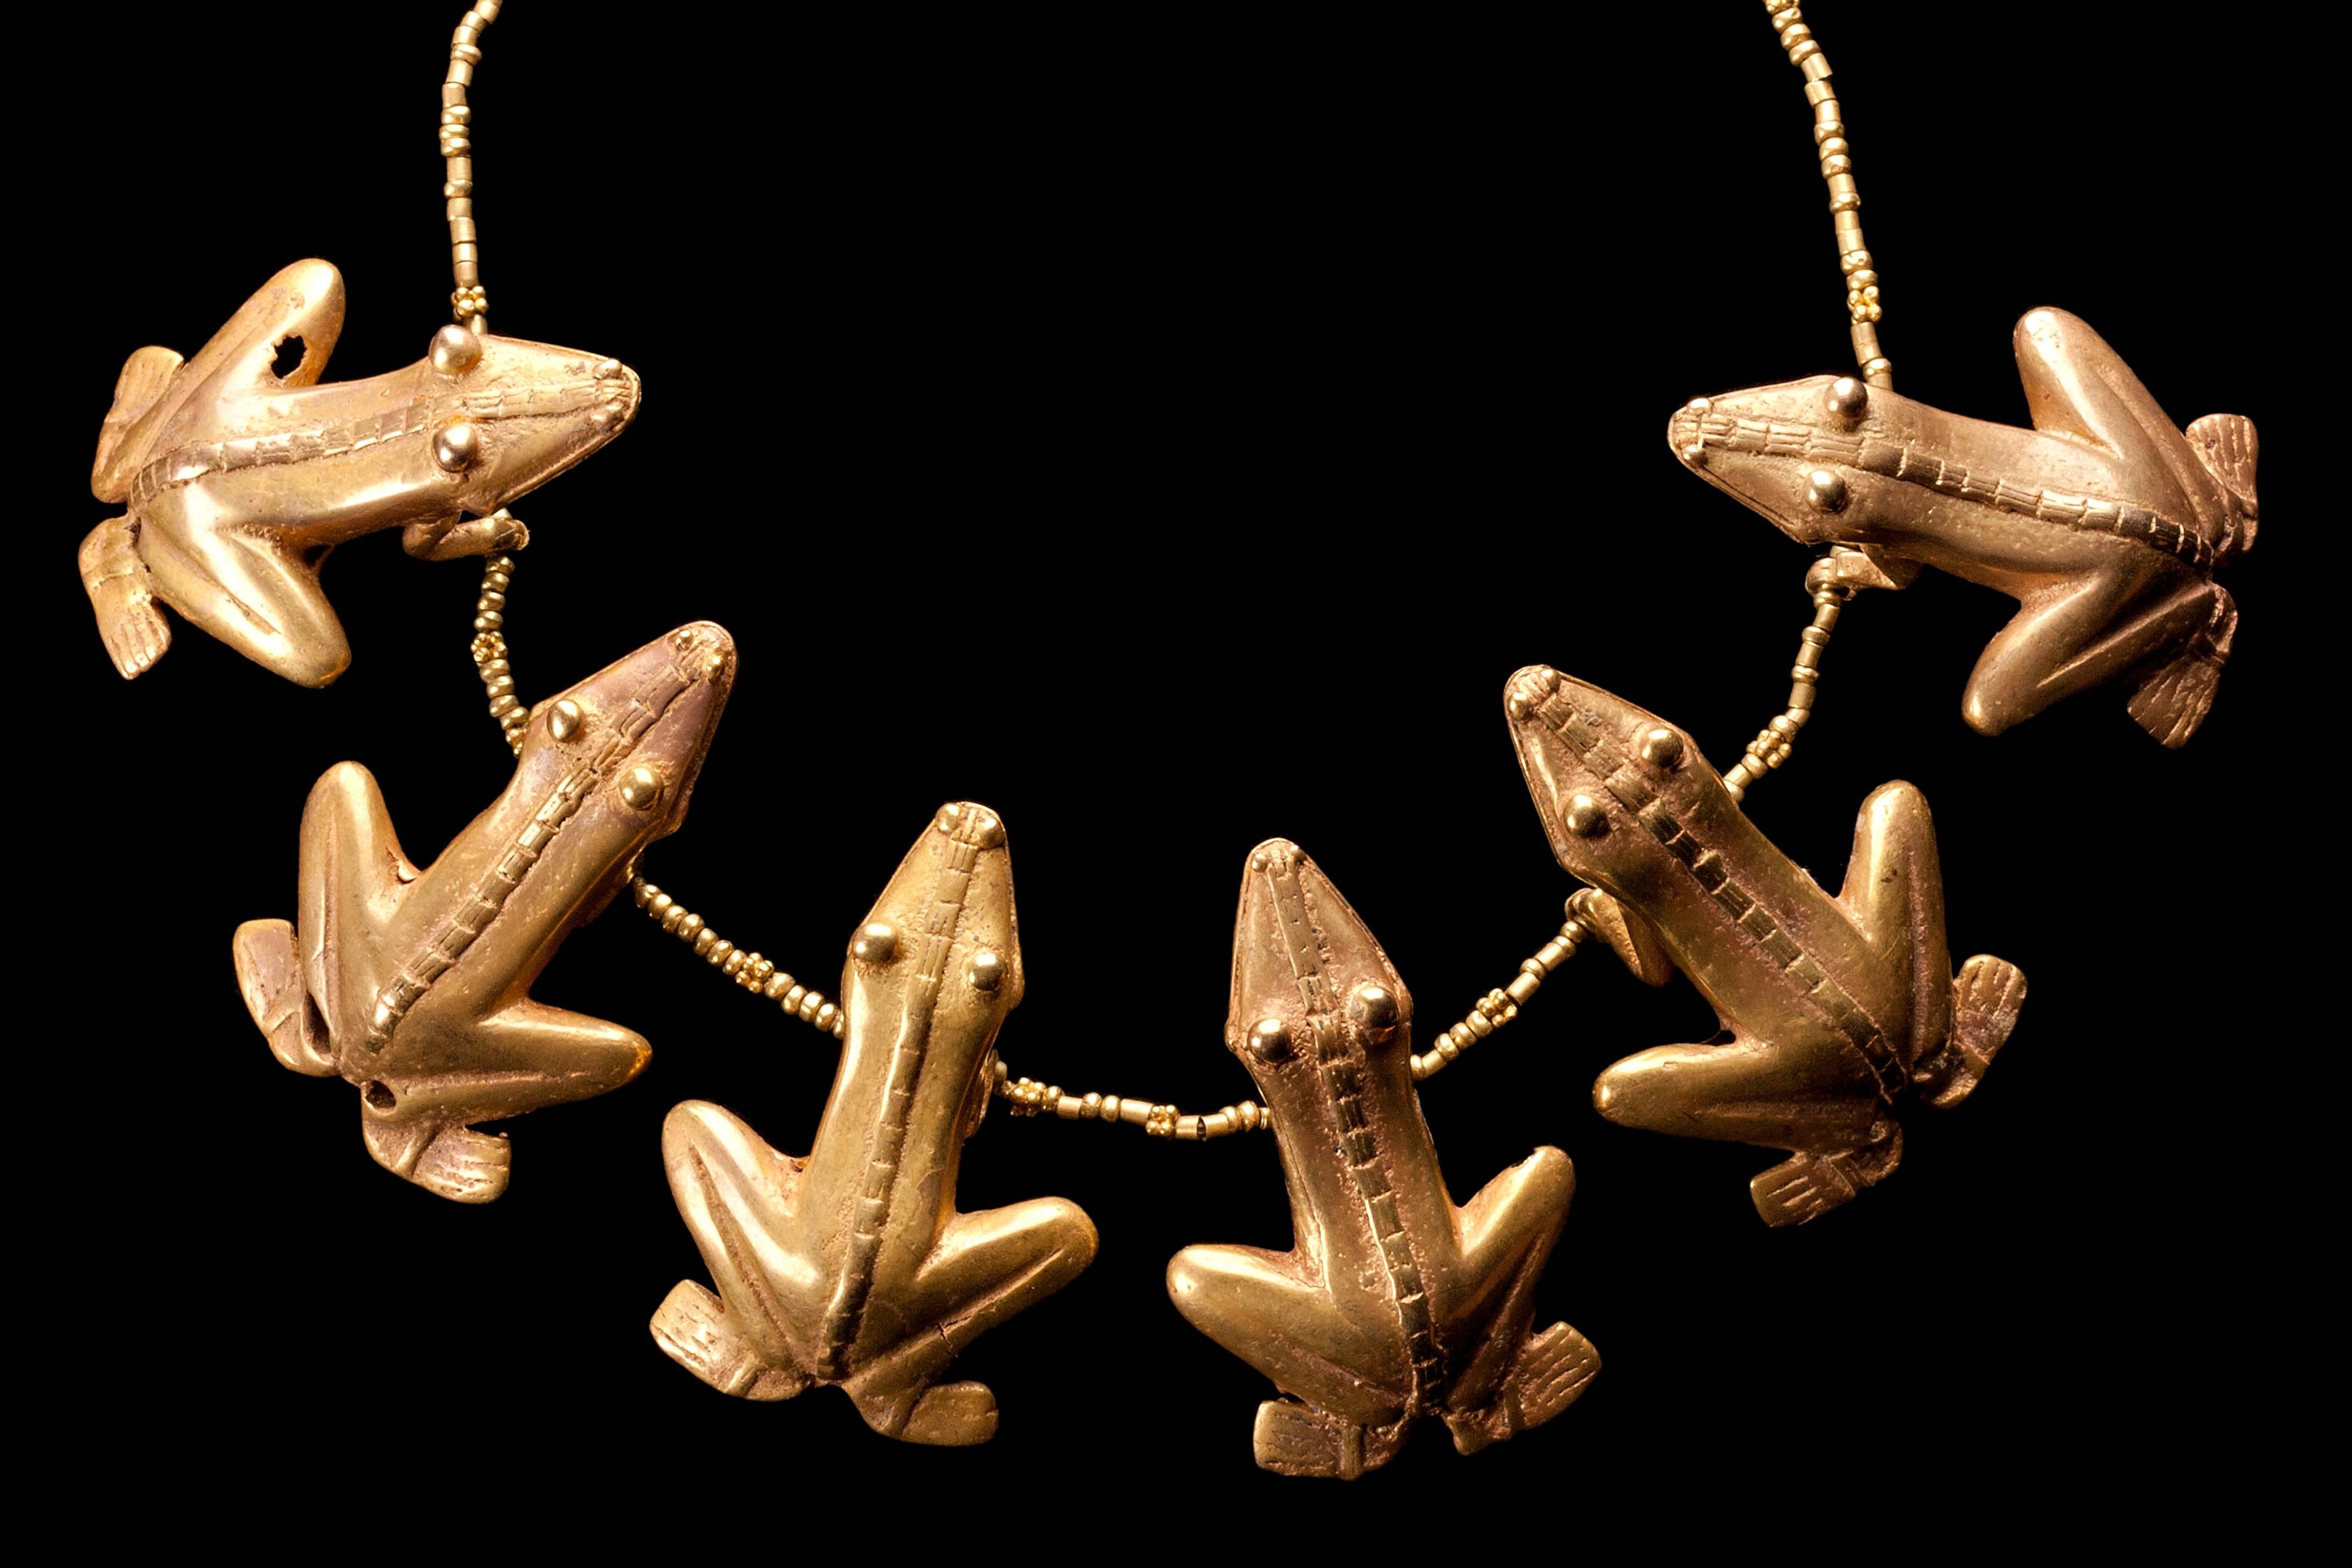 Gold Quimbaya necklace with beads in the shape of six frogs of delicate and slender shape with a beautiful gold color and patina, very nice expression with two narrow lines on the back, segmented by horizontal lines. The frogs are associated to